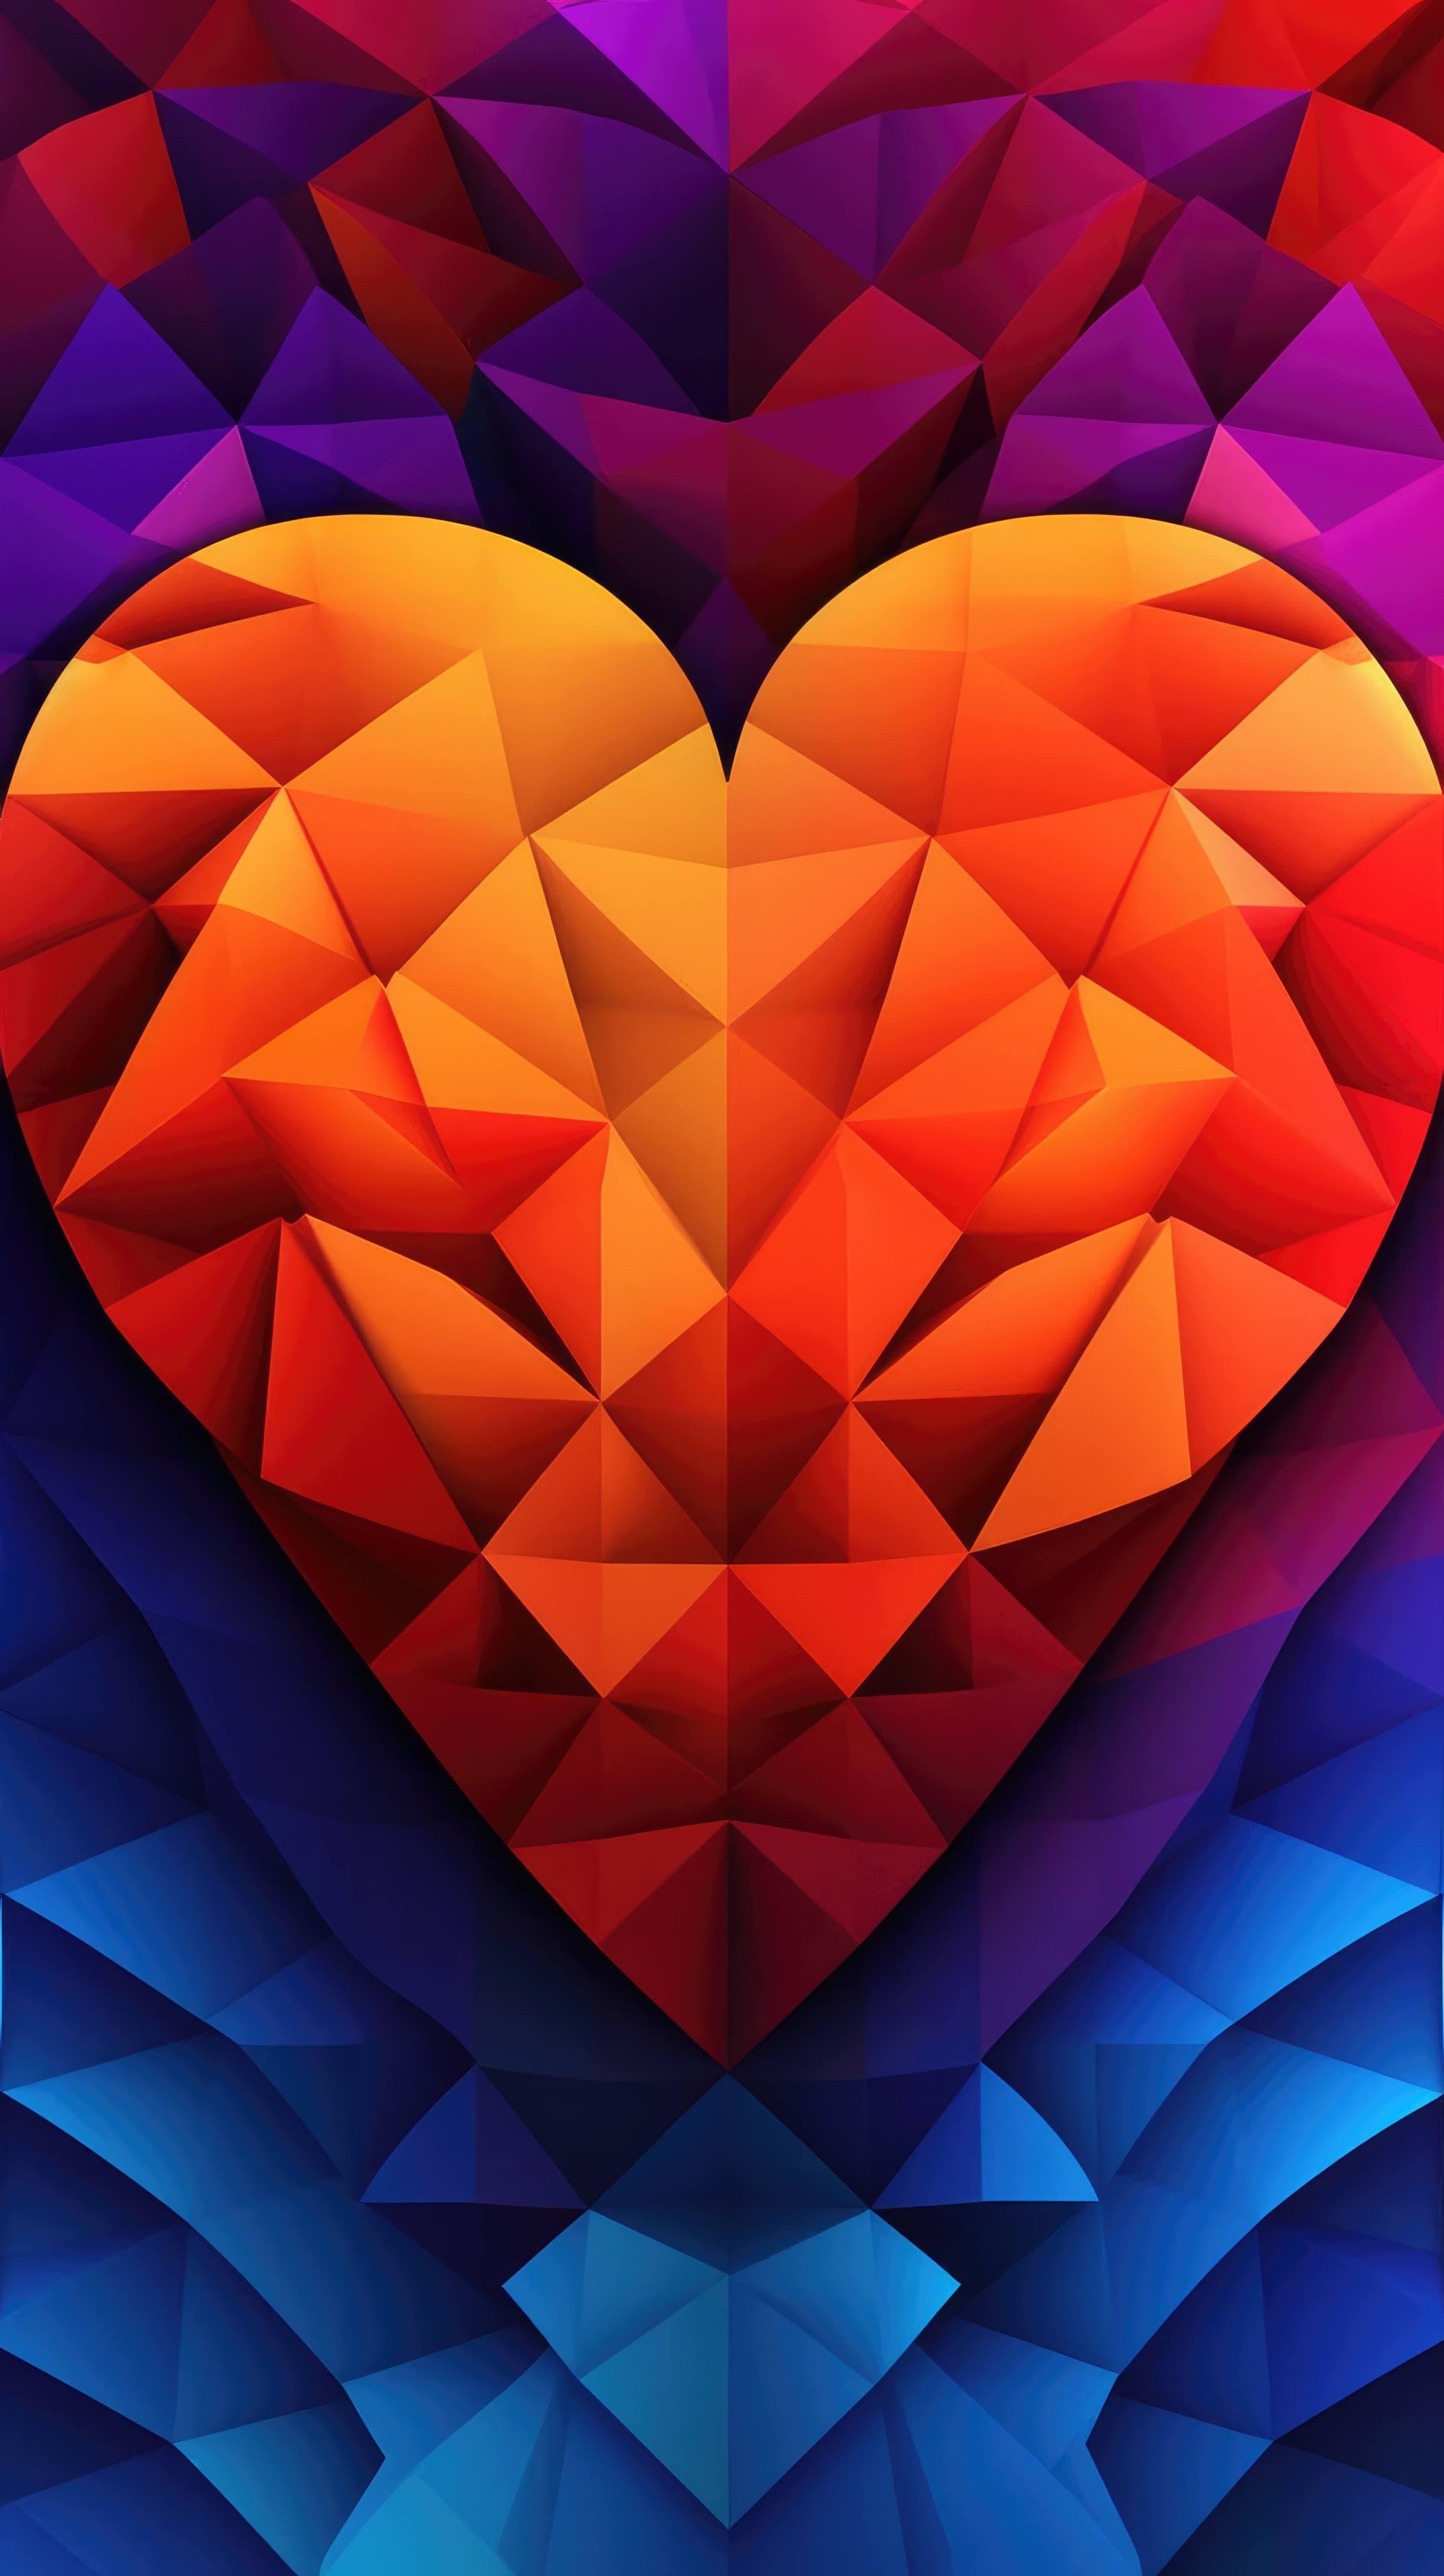 A 4k Ultra HD Mobile Wallpaper With Colorful Abstract Heart